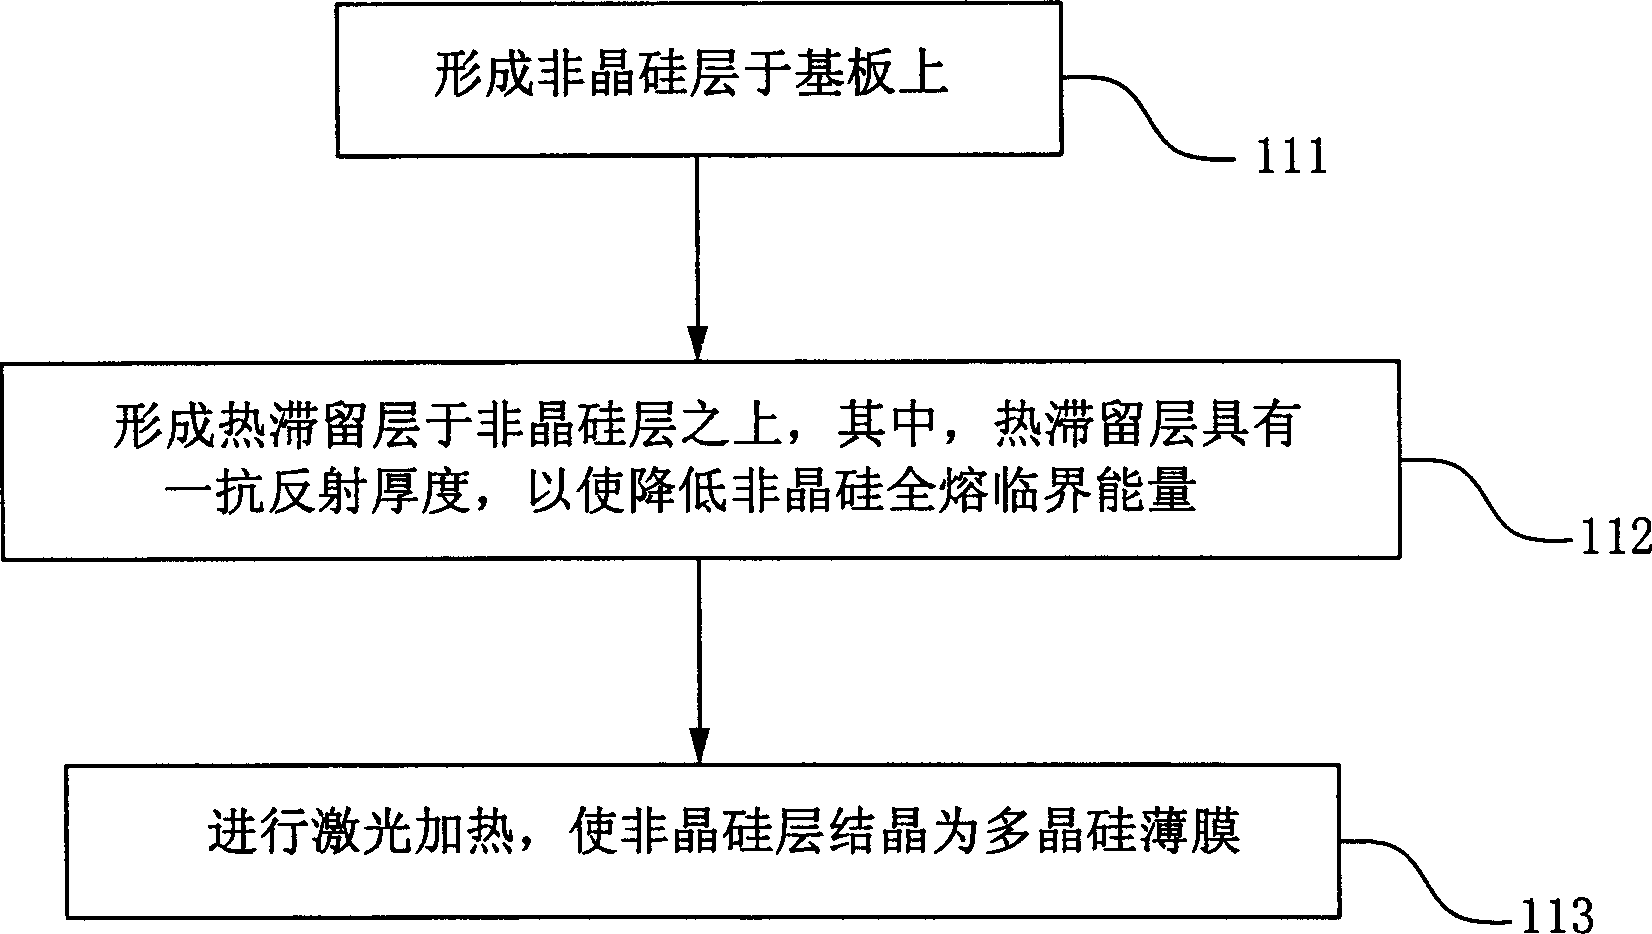 Auxiliary laser crystallization method for making polysilicon